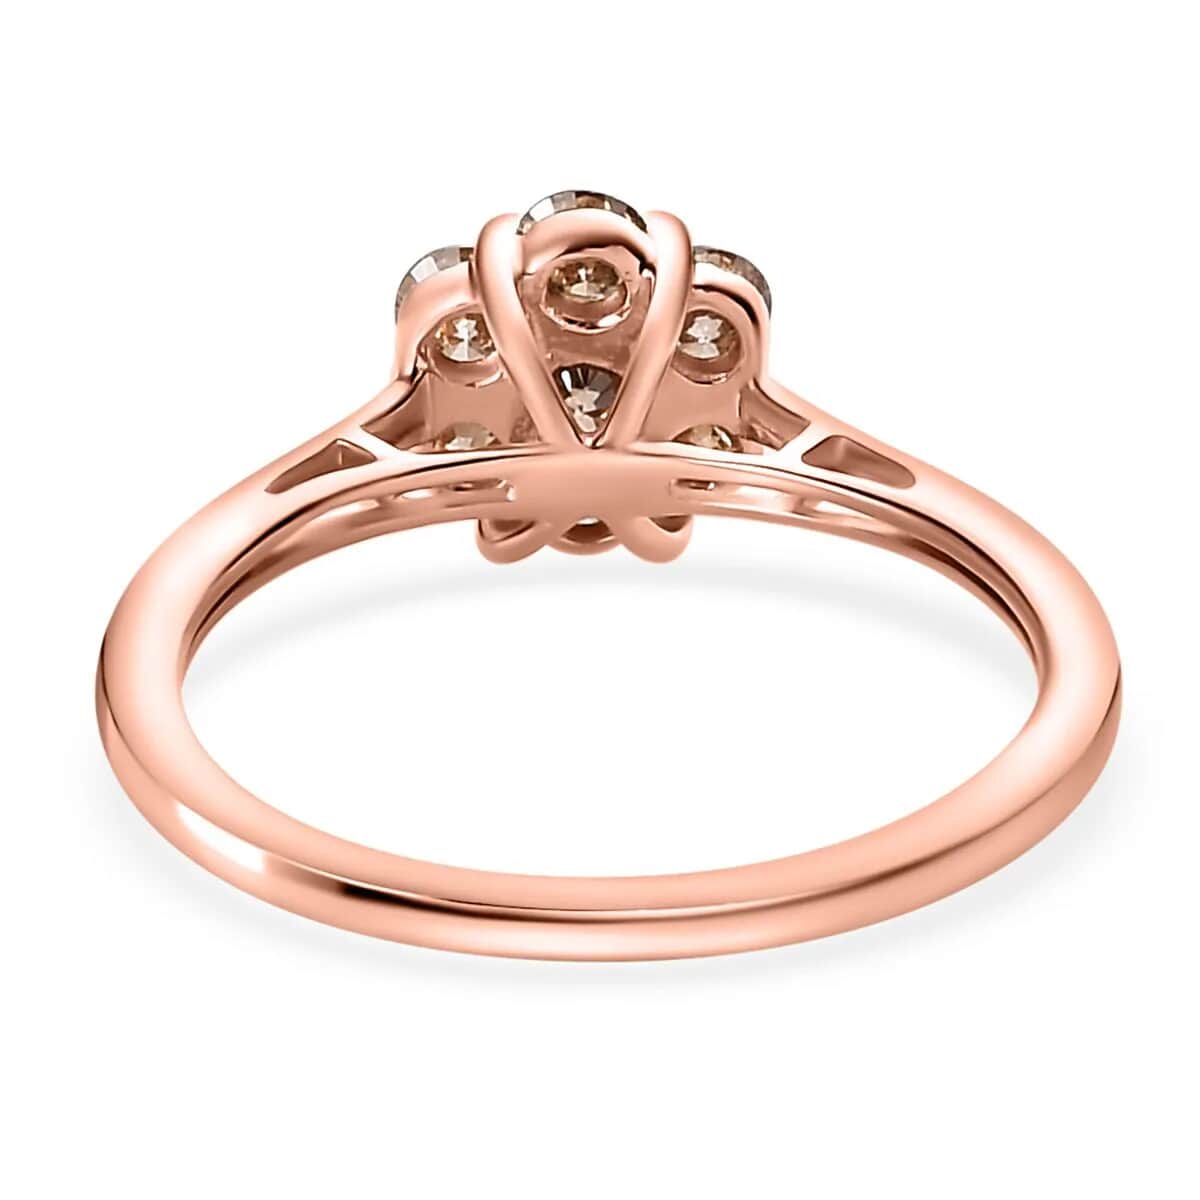 Luxoro 10K Rose Gold Natural Champagne Diamond Floral Ring ,Diamond Floral Ring, Engagement Rings, Seven Stone Ring For Women, Promise Rings 0.50 ctw image number 4